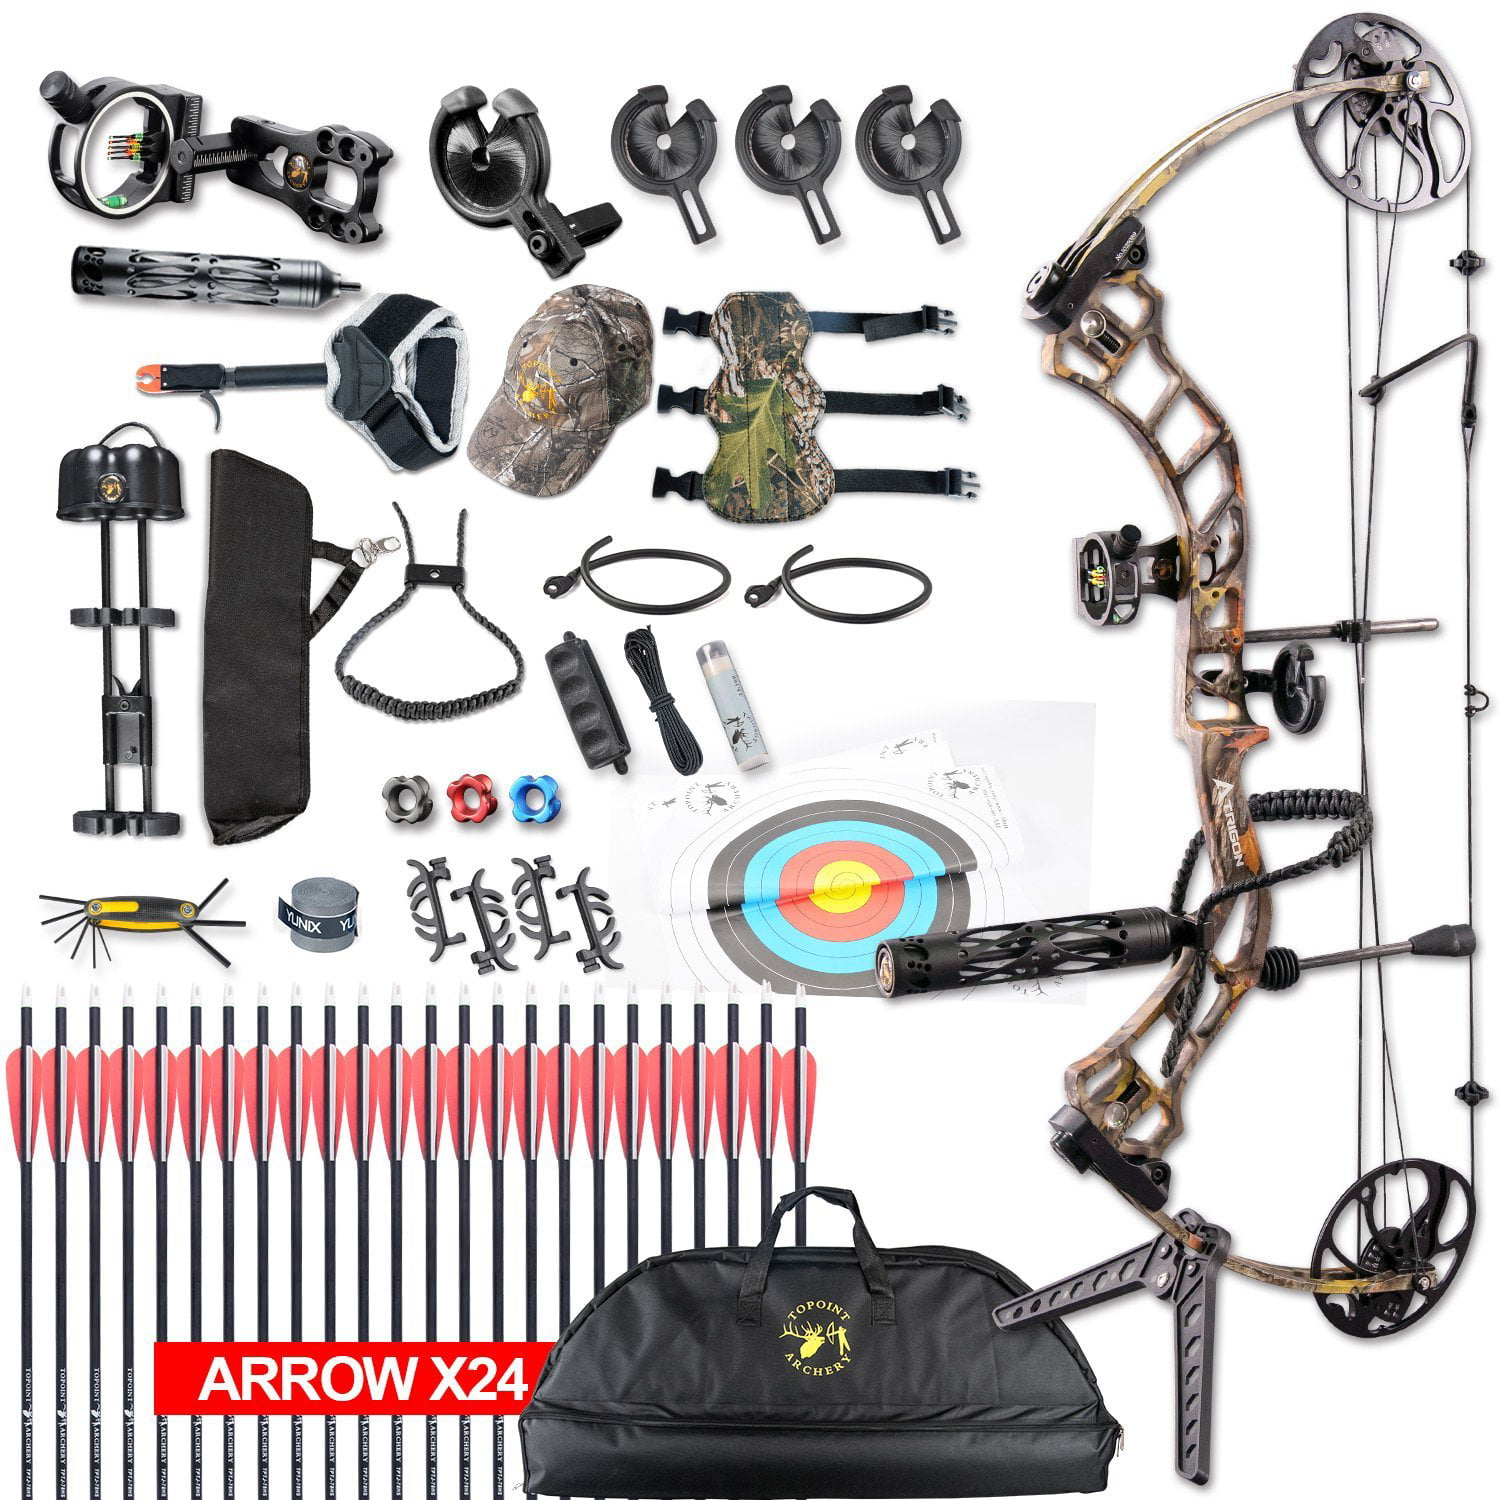 TOPOINT Ship from USA Archery Trigon Compound Bow Package,CNC Milling Bow Riser,USA Gordon Composites Limb,BCY String,19-30 Draw Length,19-70Lbs Draw Weight,IBO 320fps 